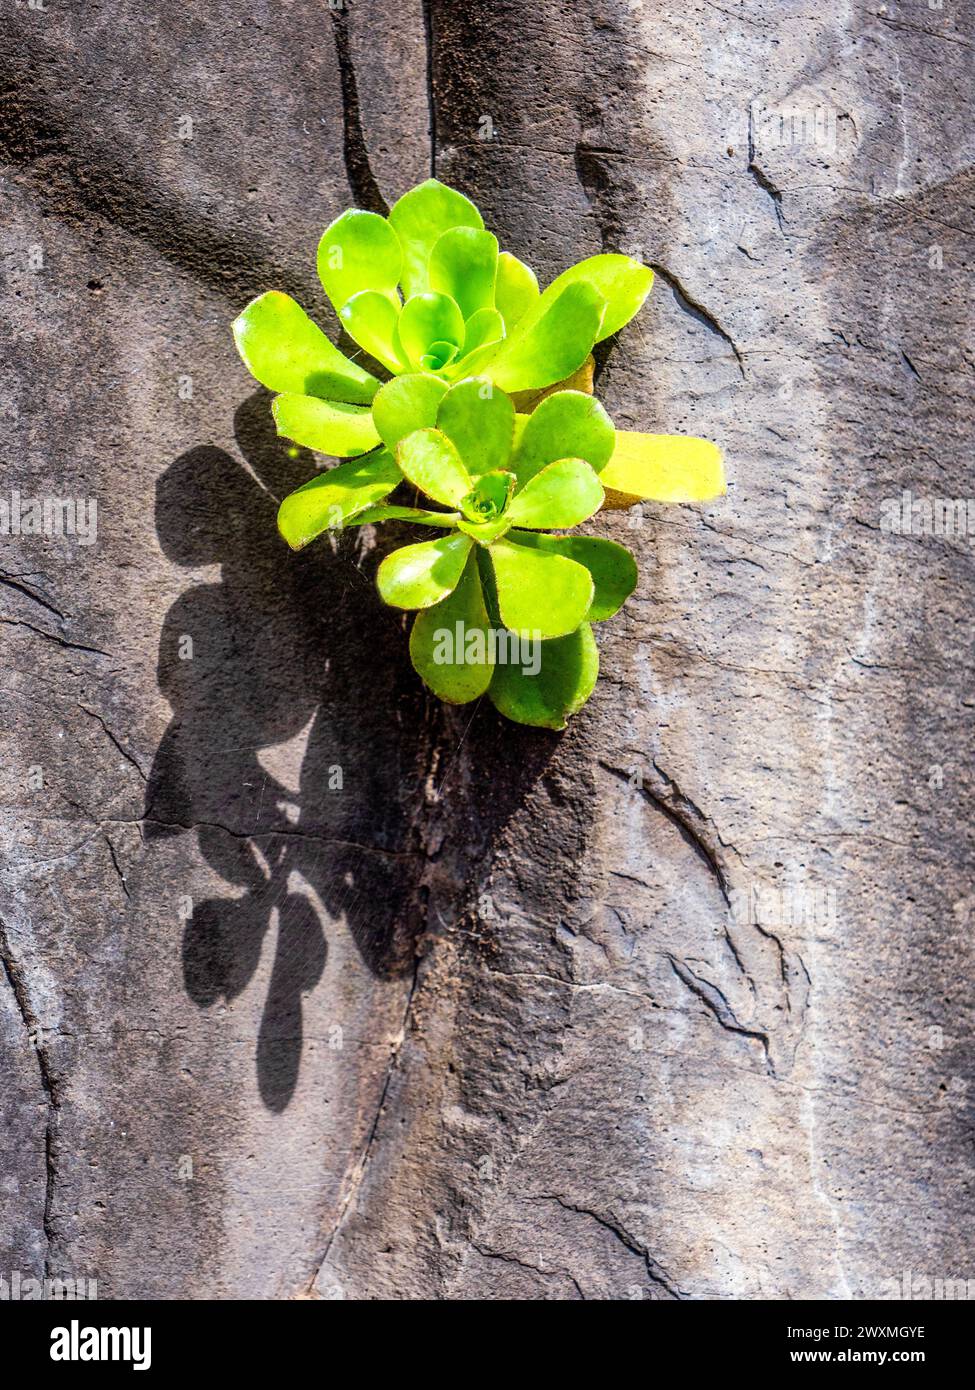 A thick-leaved plant (Aeonium glutinosum) has chosen a rock face as its habitat. Stock Photo